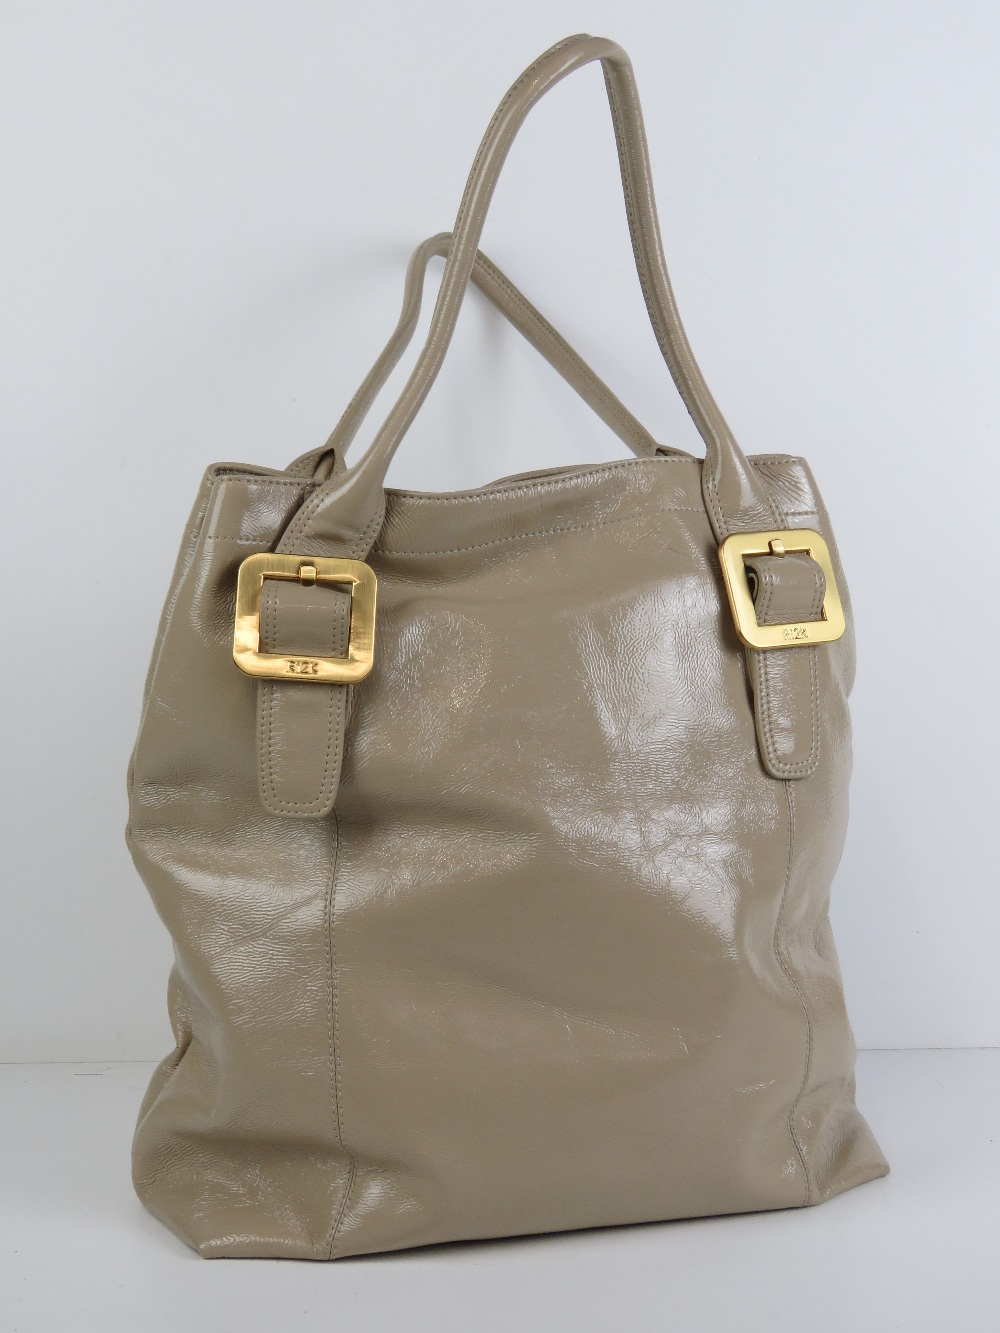 Ri2K; a beige patent ladies handbag, 100% leather outer, with dustbag, approx 17" high x 13" wide.